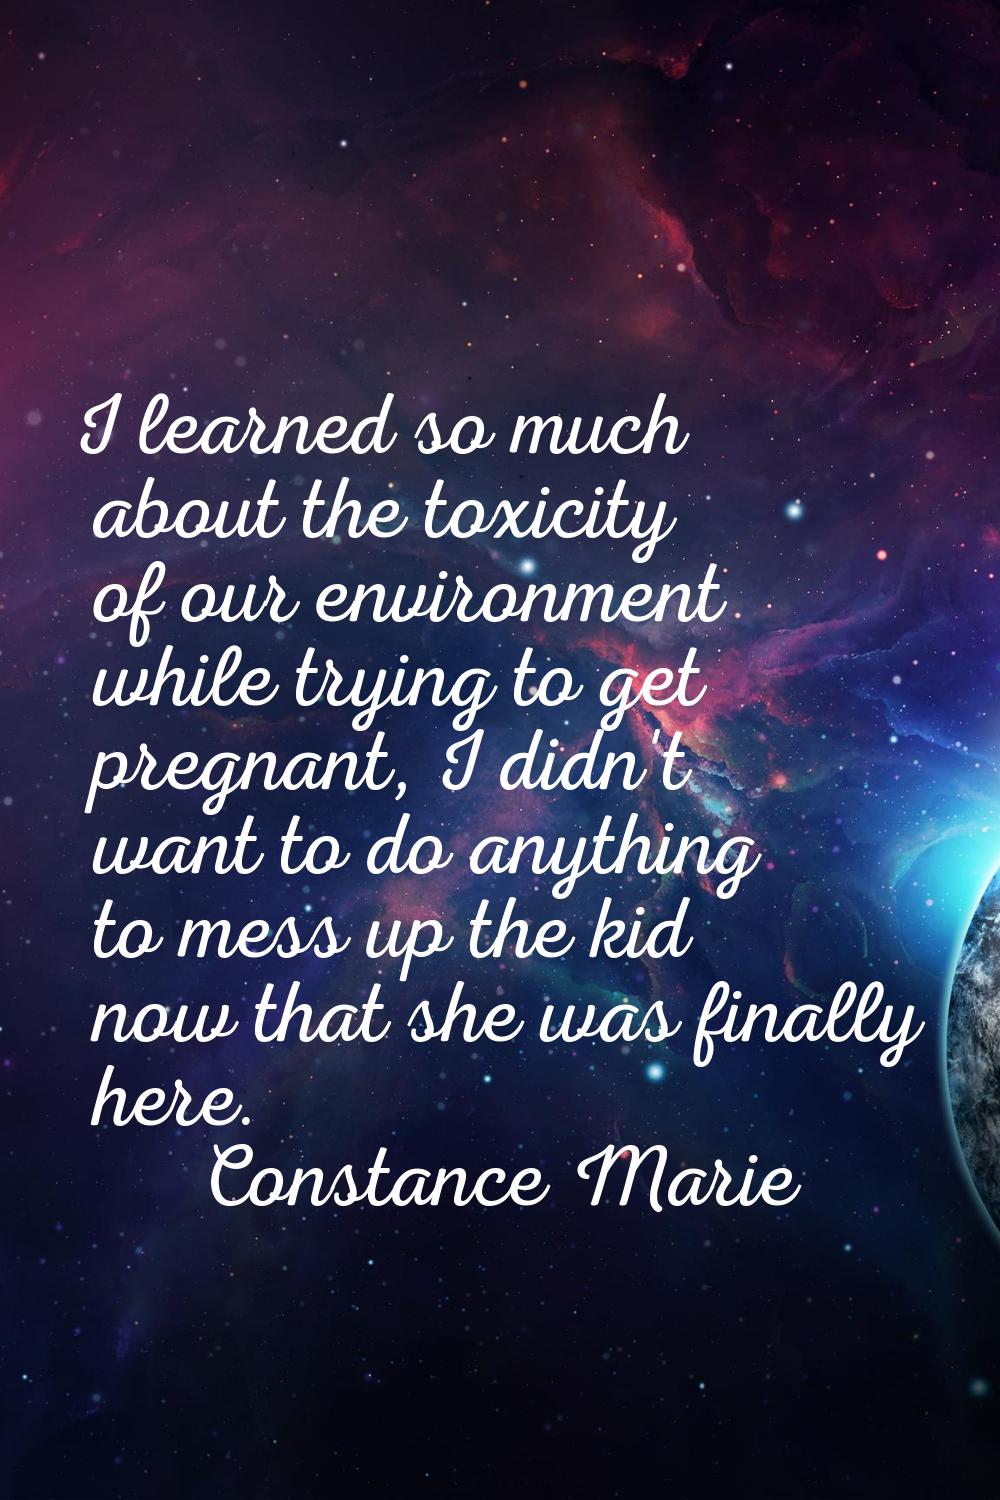 I learned so much about the toxicity of our environment while trying to get pregnant, I didn't want